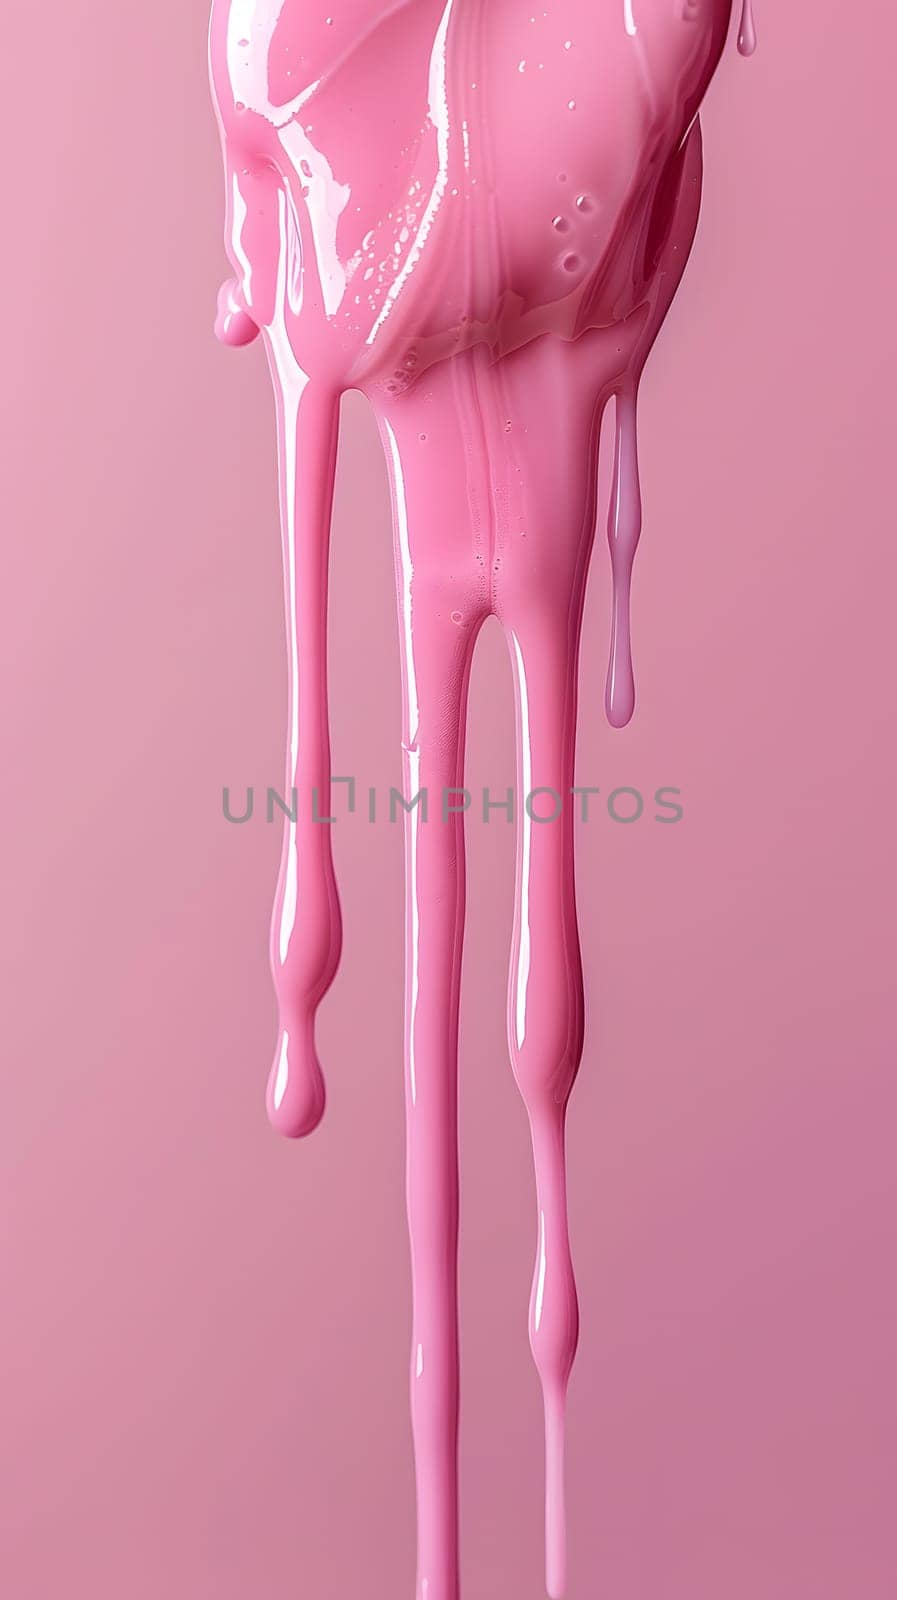 A close up of pink paint dripping on a magenta background, resembling a human body gesture with the colors blending on the arm, leg, knee, and nail